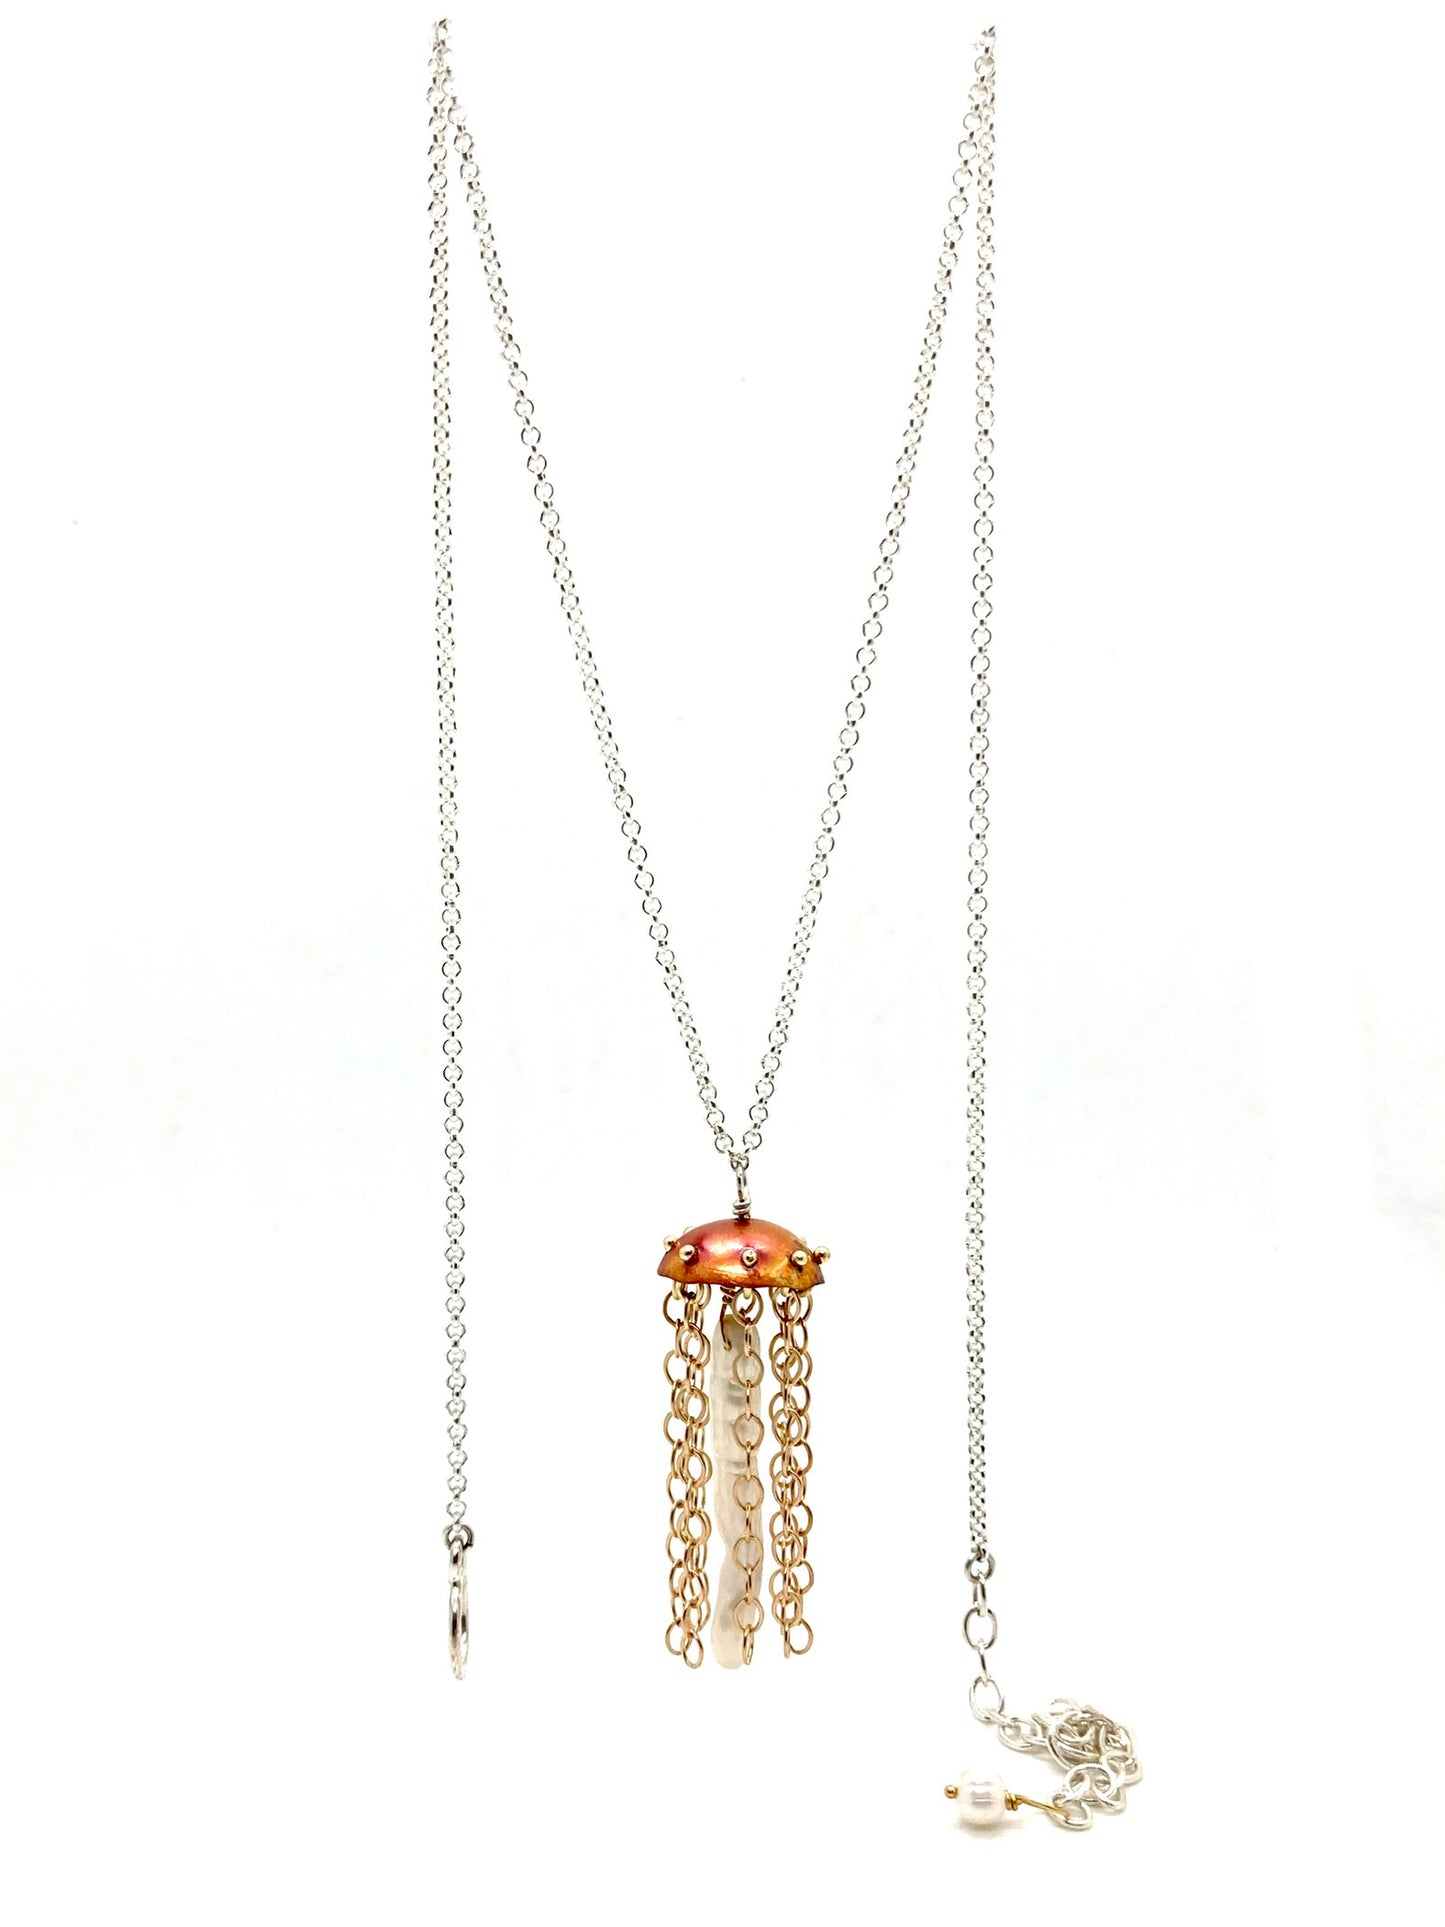 Red Copper Jellyfish Necklace